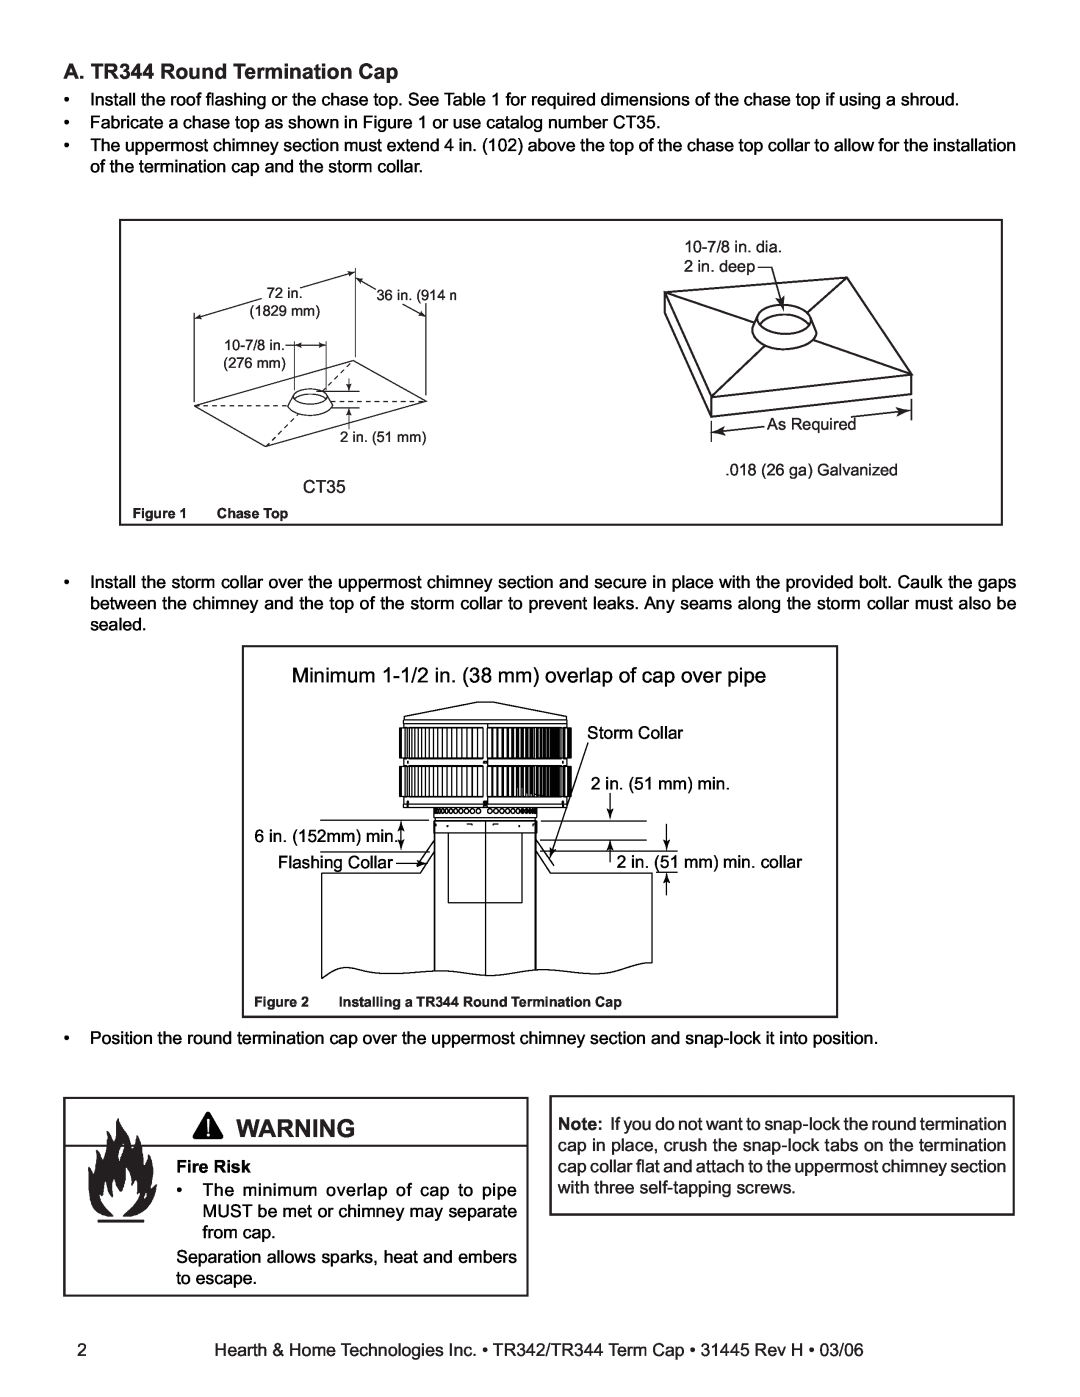 Hearth and Home Technologies TV342, TR342 installation instructions A. TR344 Round Termination Cap, Fire Risk 